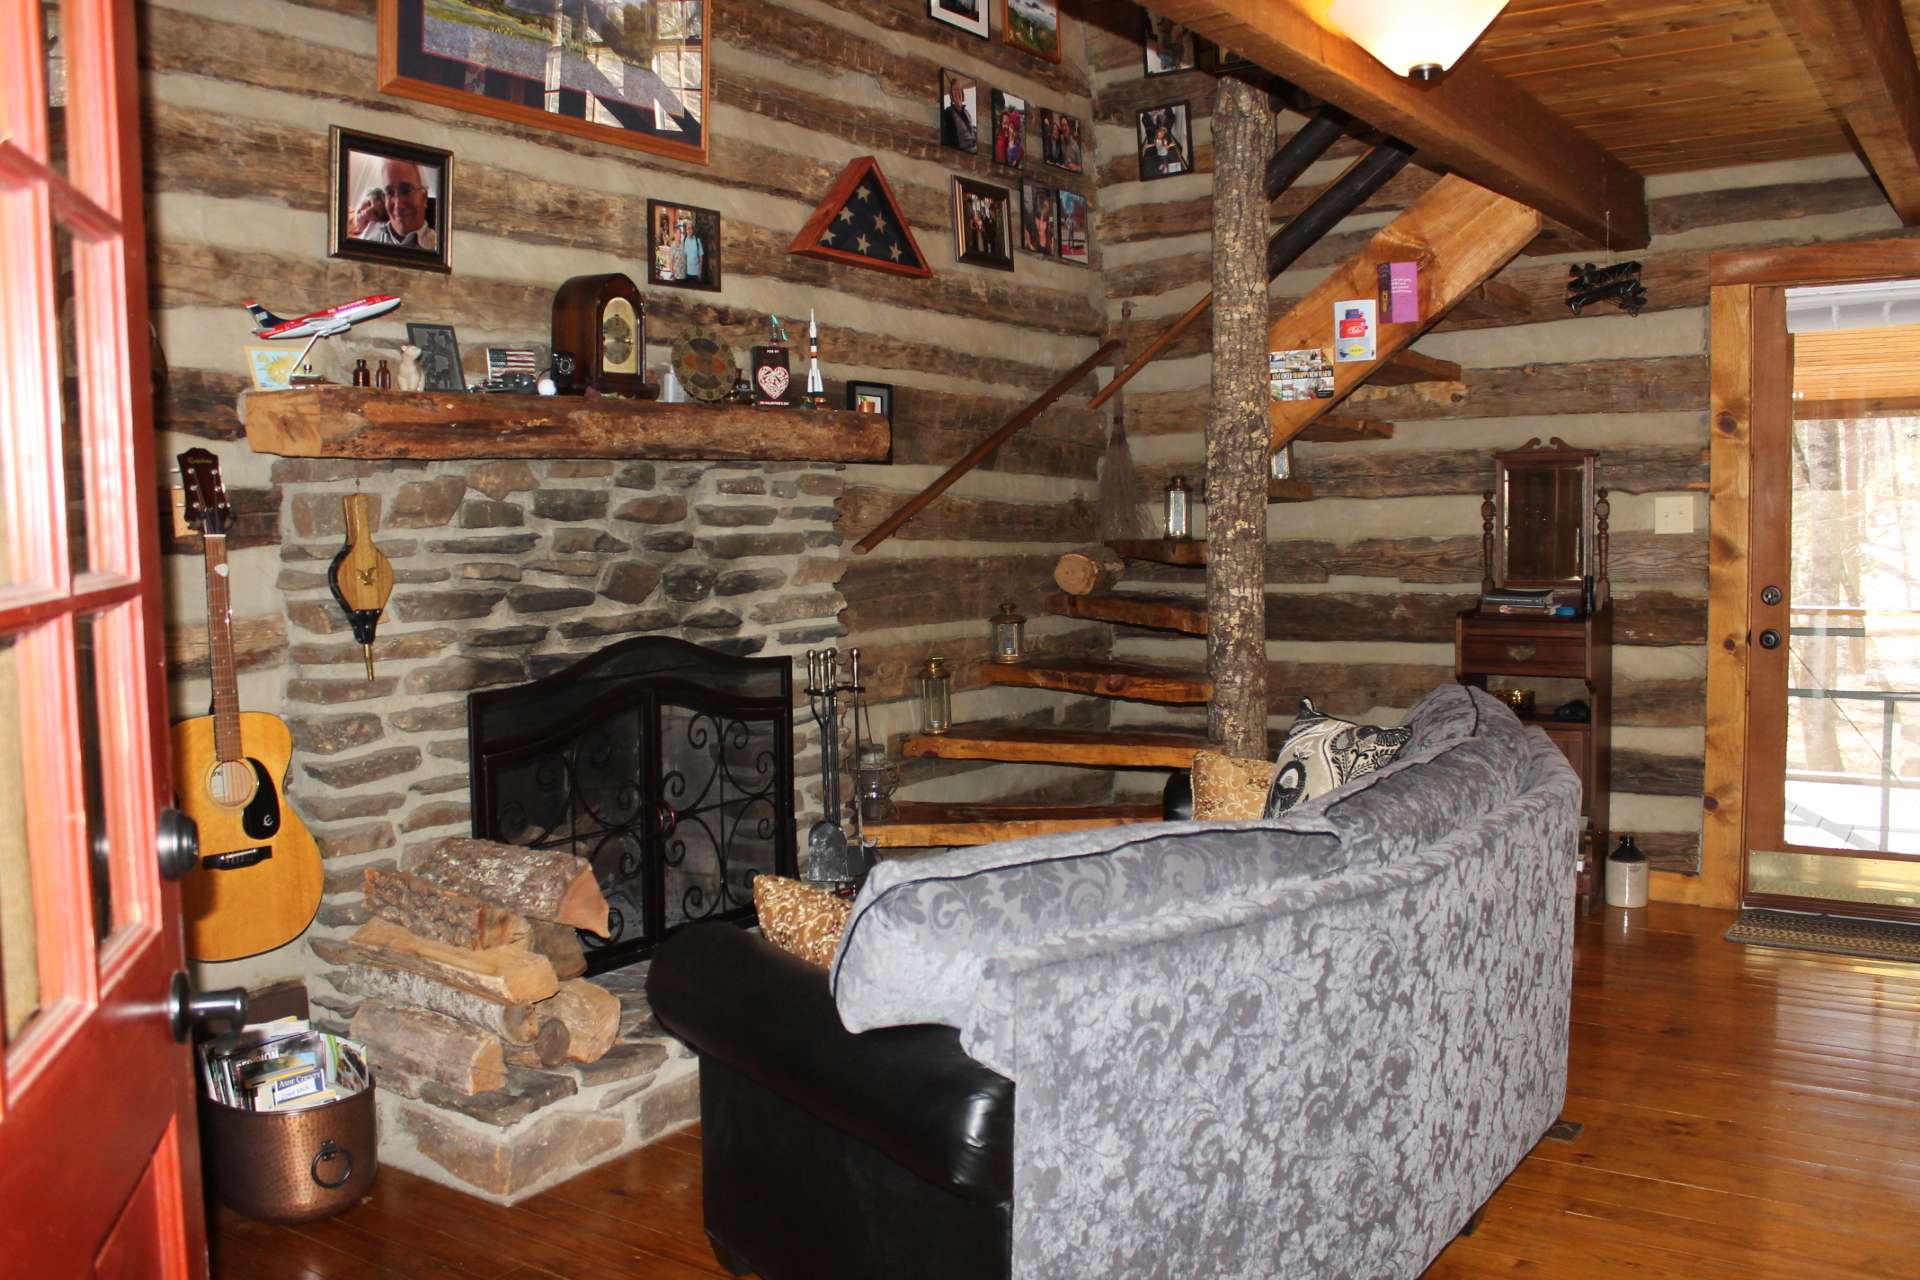 This cozy spot in front of the fireplace is so inviting - perfect for warming up after a day on the slopes.